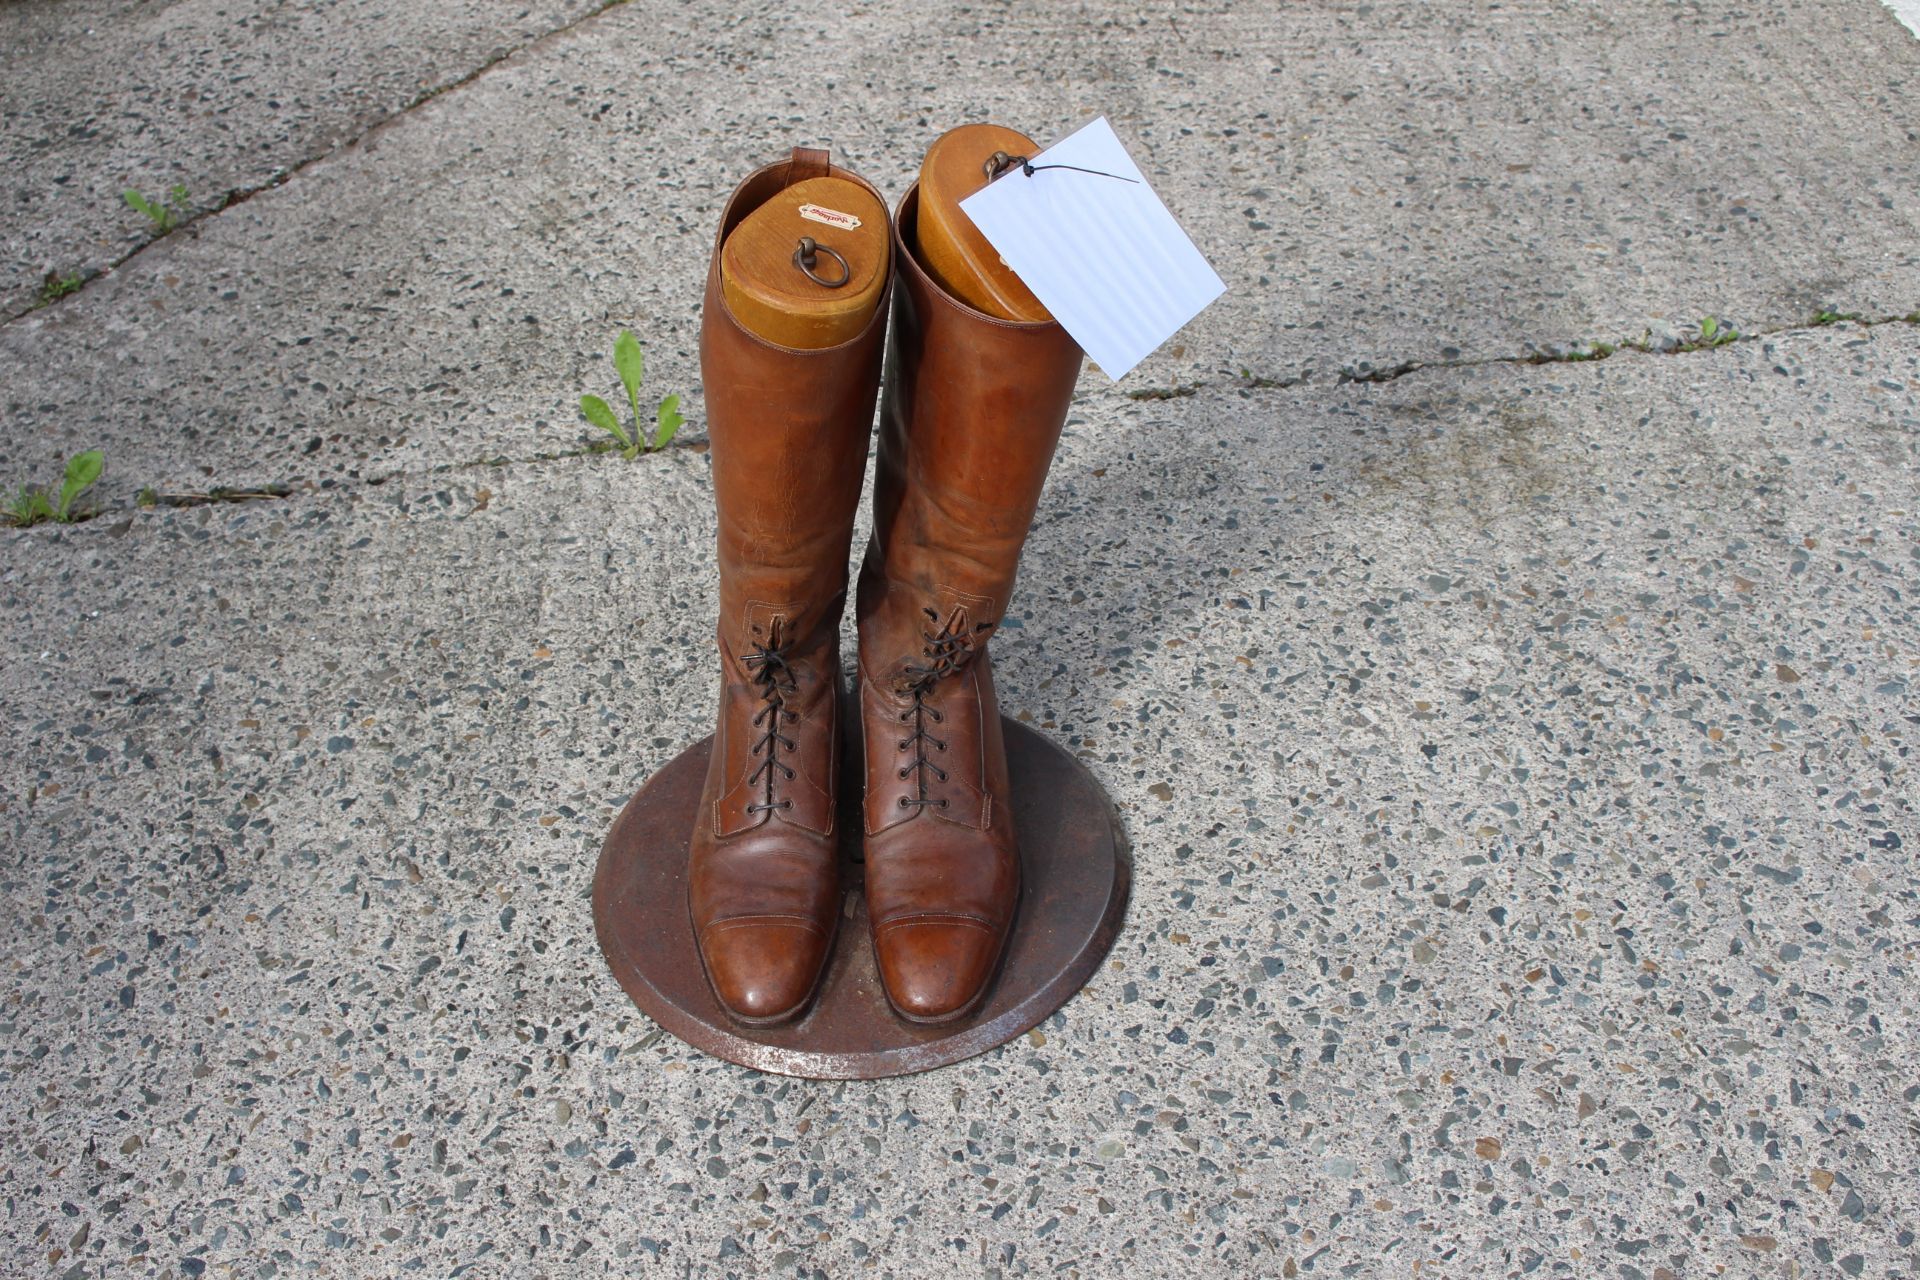 leather tan shop desplay boots on stainless steel stand with Morland's woods  H:51CM - Image 4 of 4